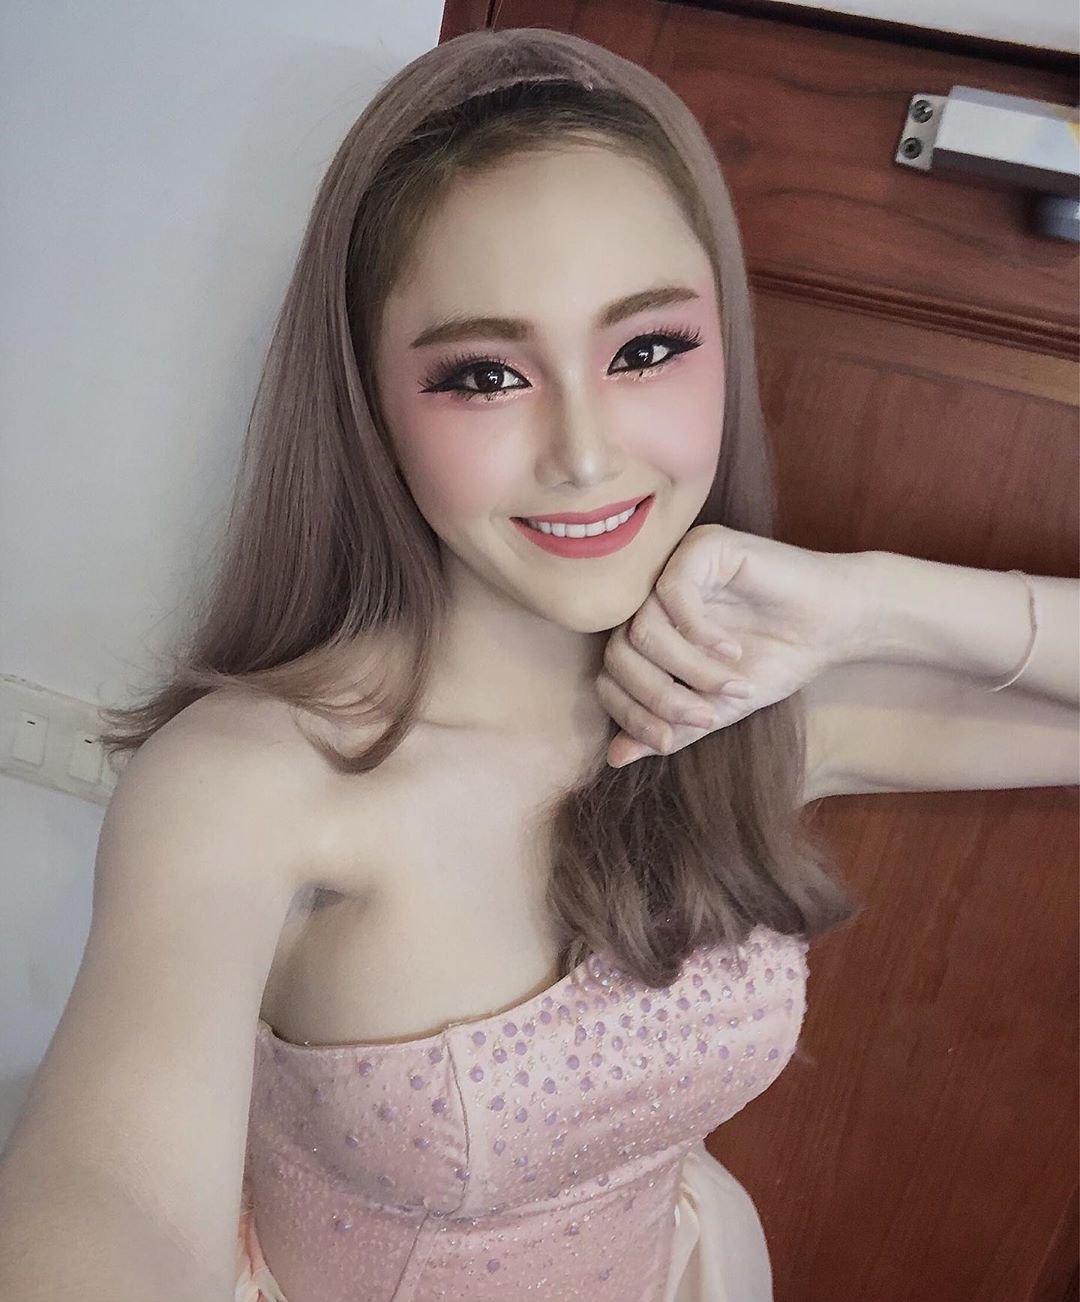 Anon Suttimoon – Most Trans Girl Famous Beauty from Thailand Instagram